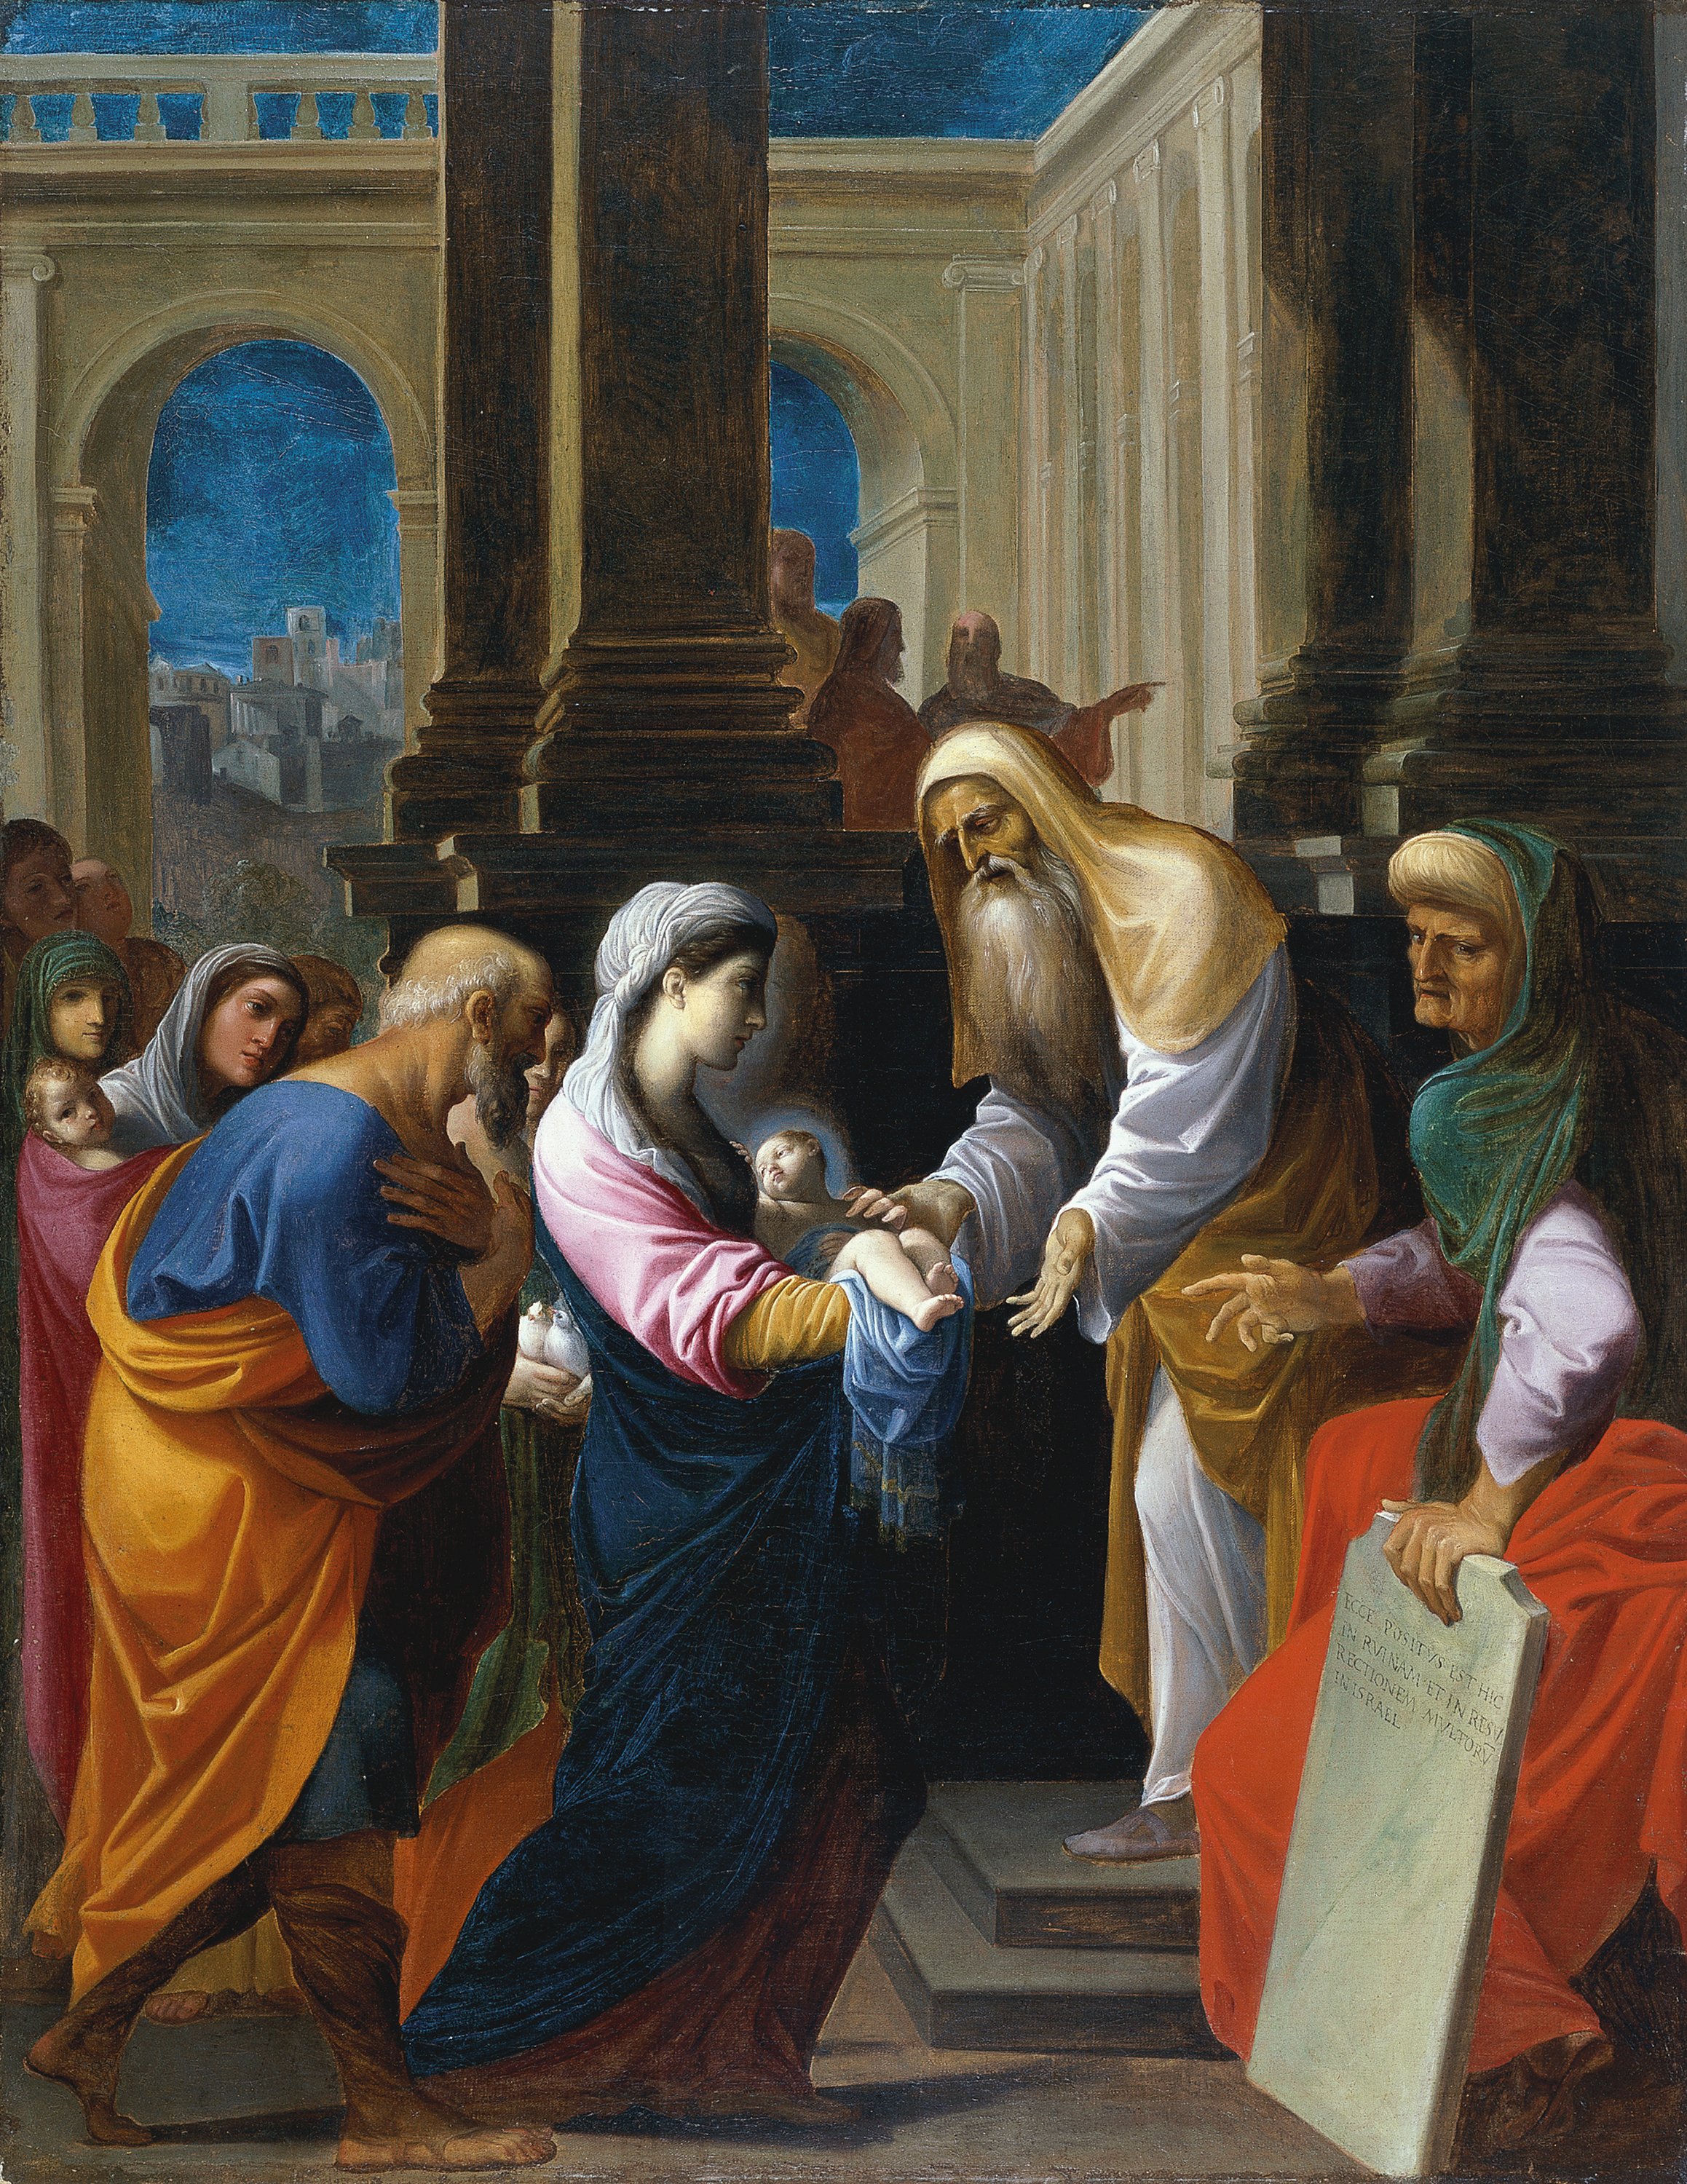 narrate the story of jesus presentation in the temple